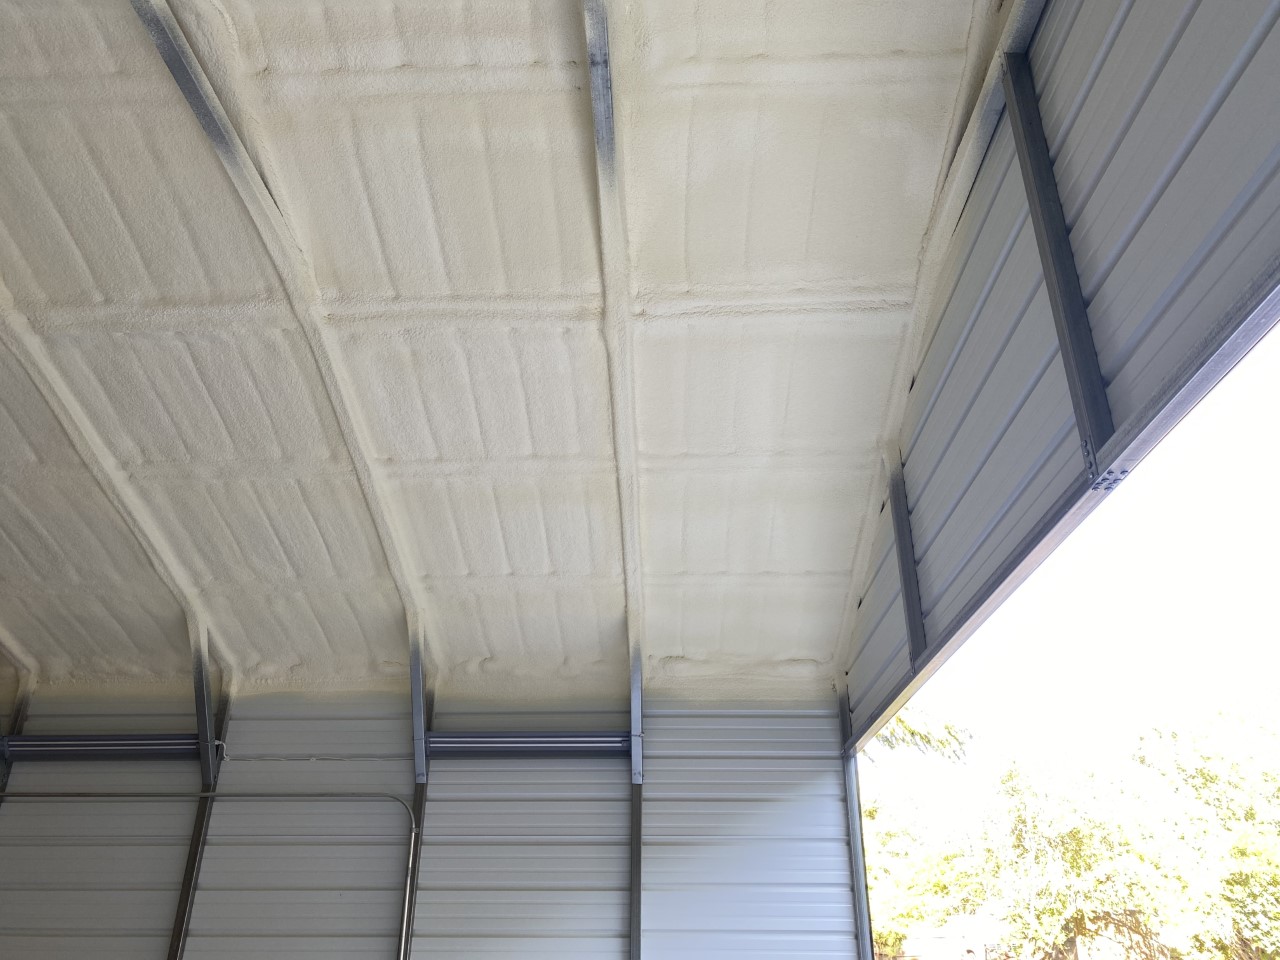 Spray foam insulation applied to the roof of a metal building